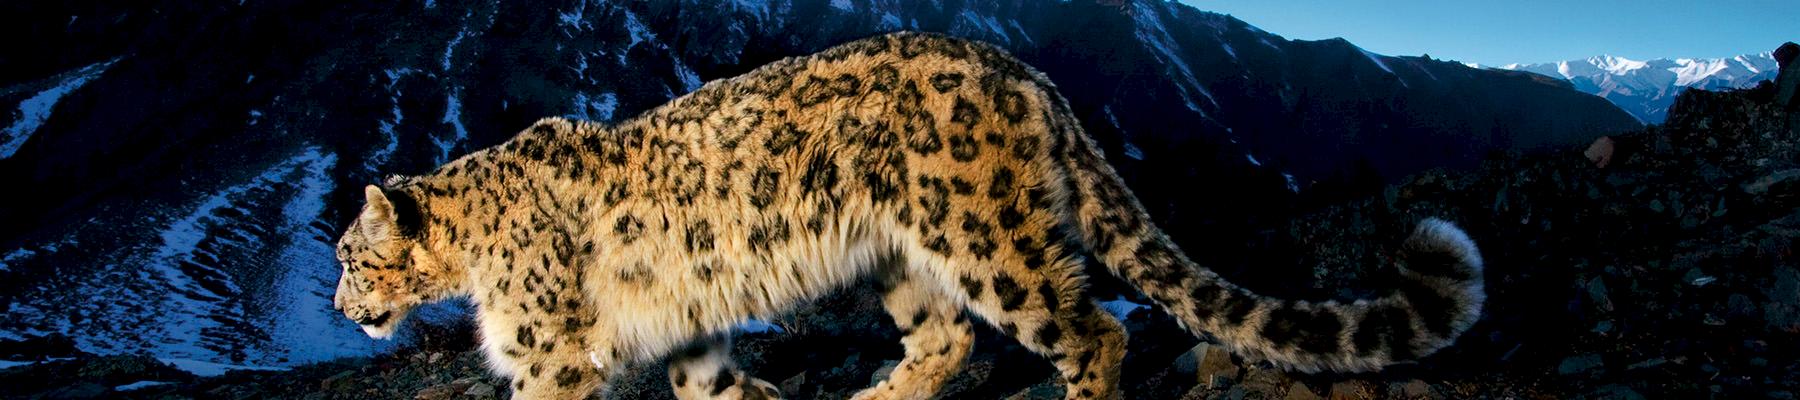 Snow leopard Uncia uncia, one of the species we're working to protect from poaching and human/wildlife conflict © National Geographic Stock /Steve Winter / WWF